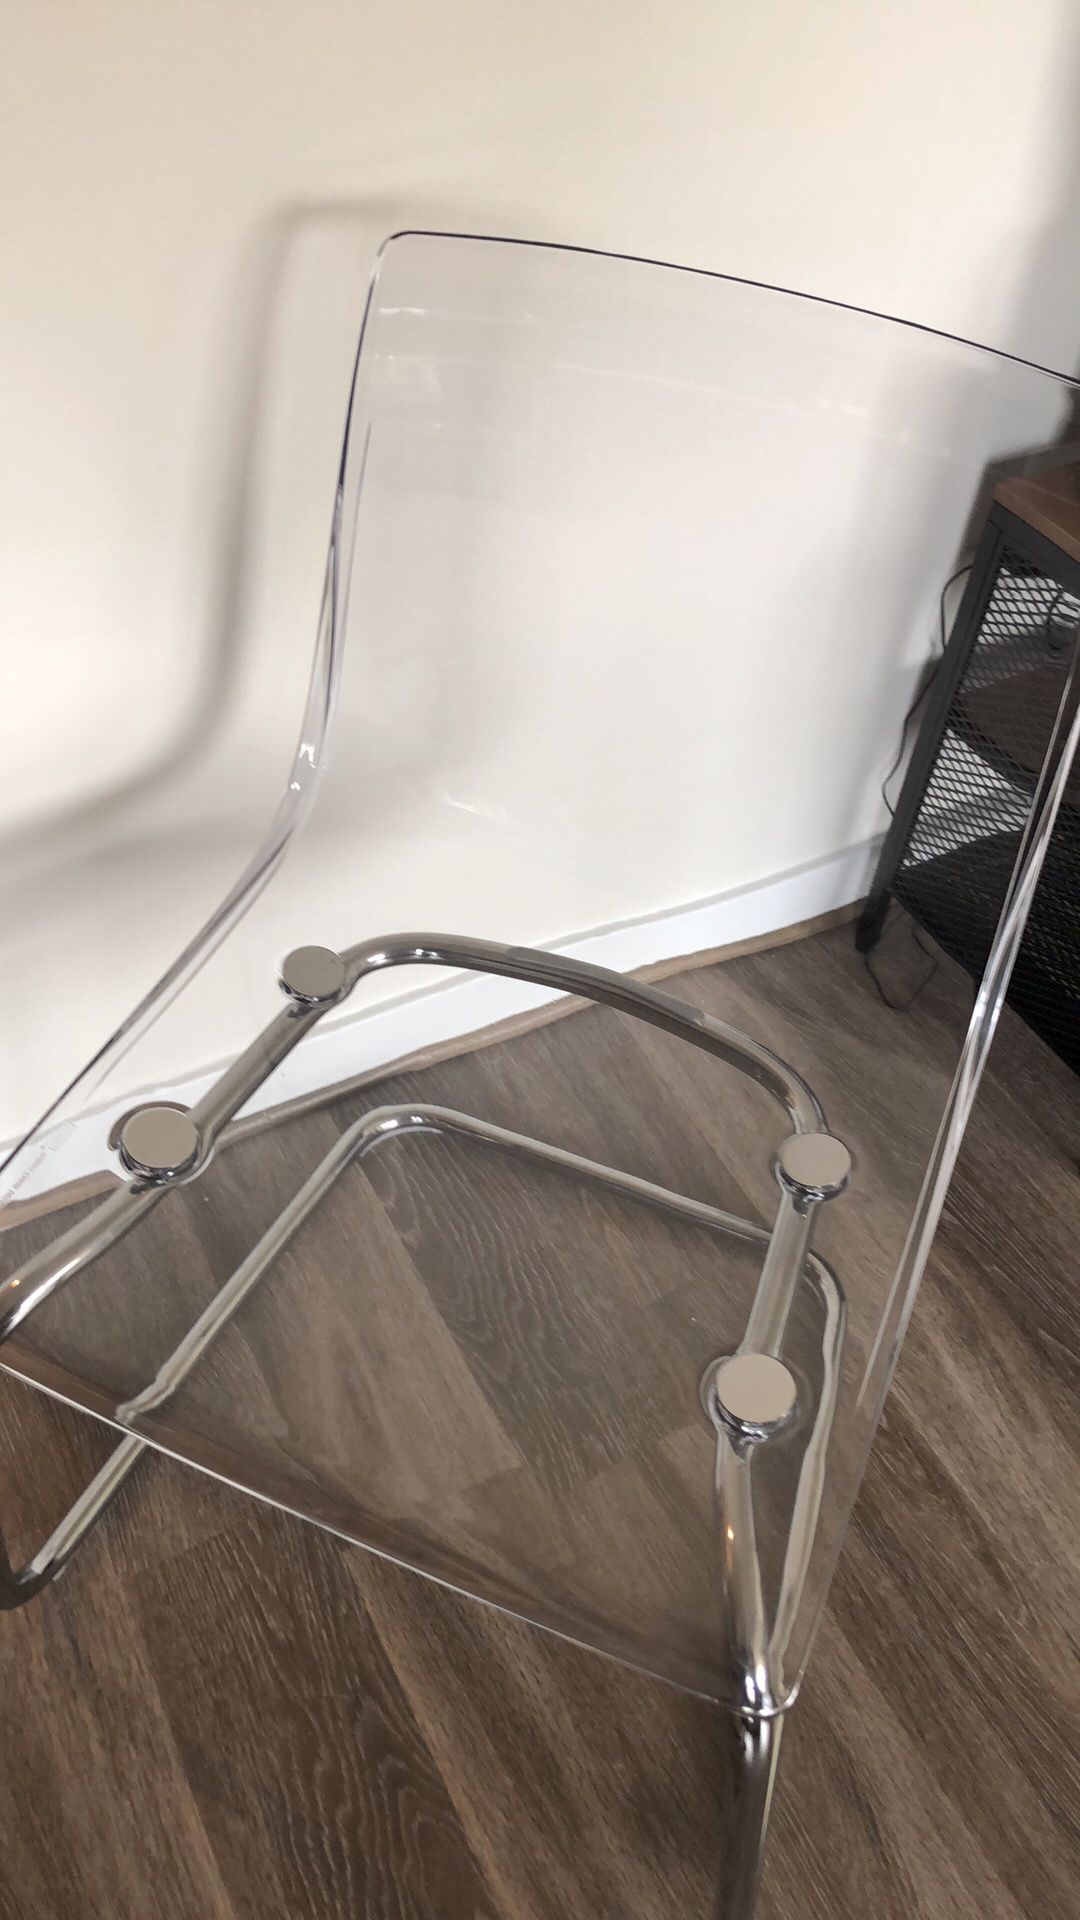 2 Clear chairs